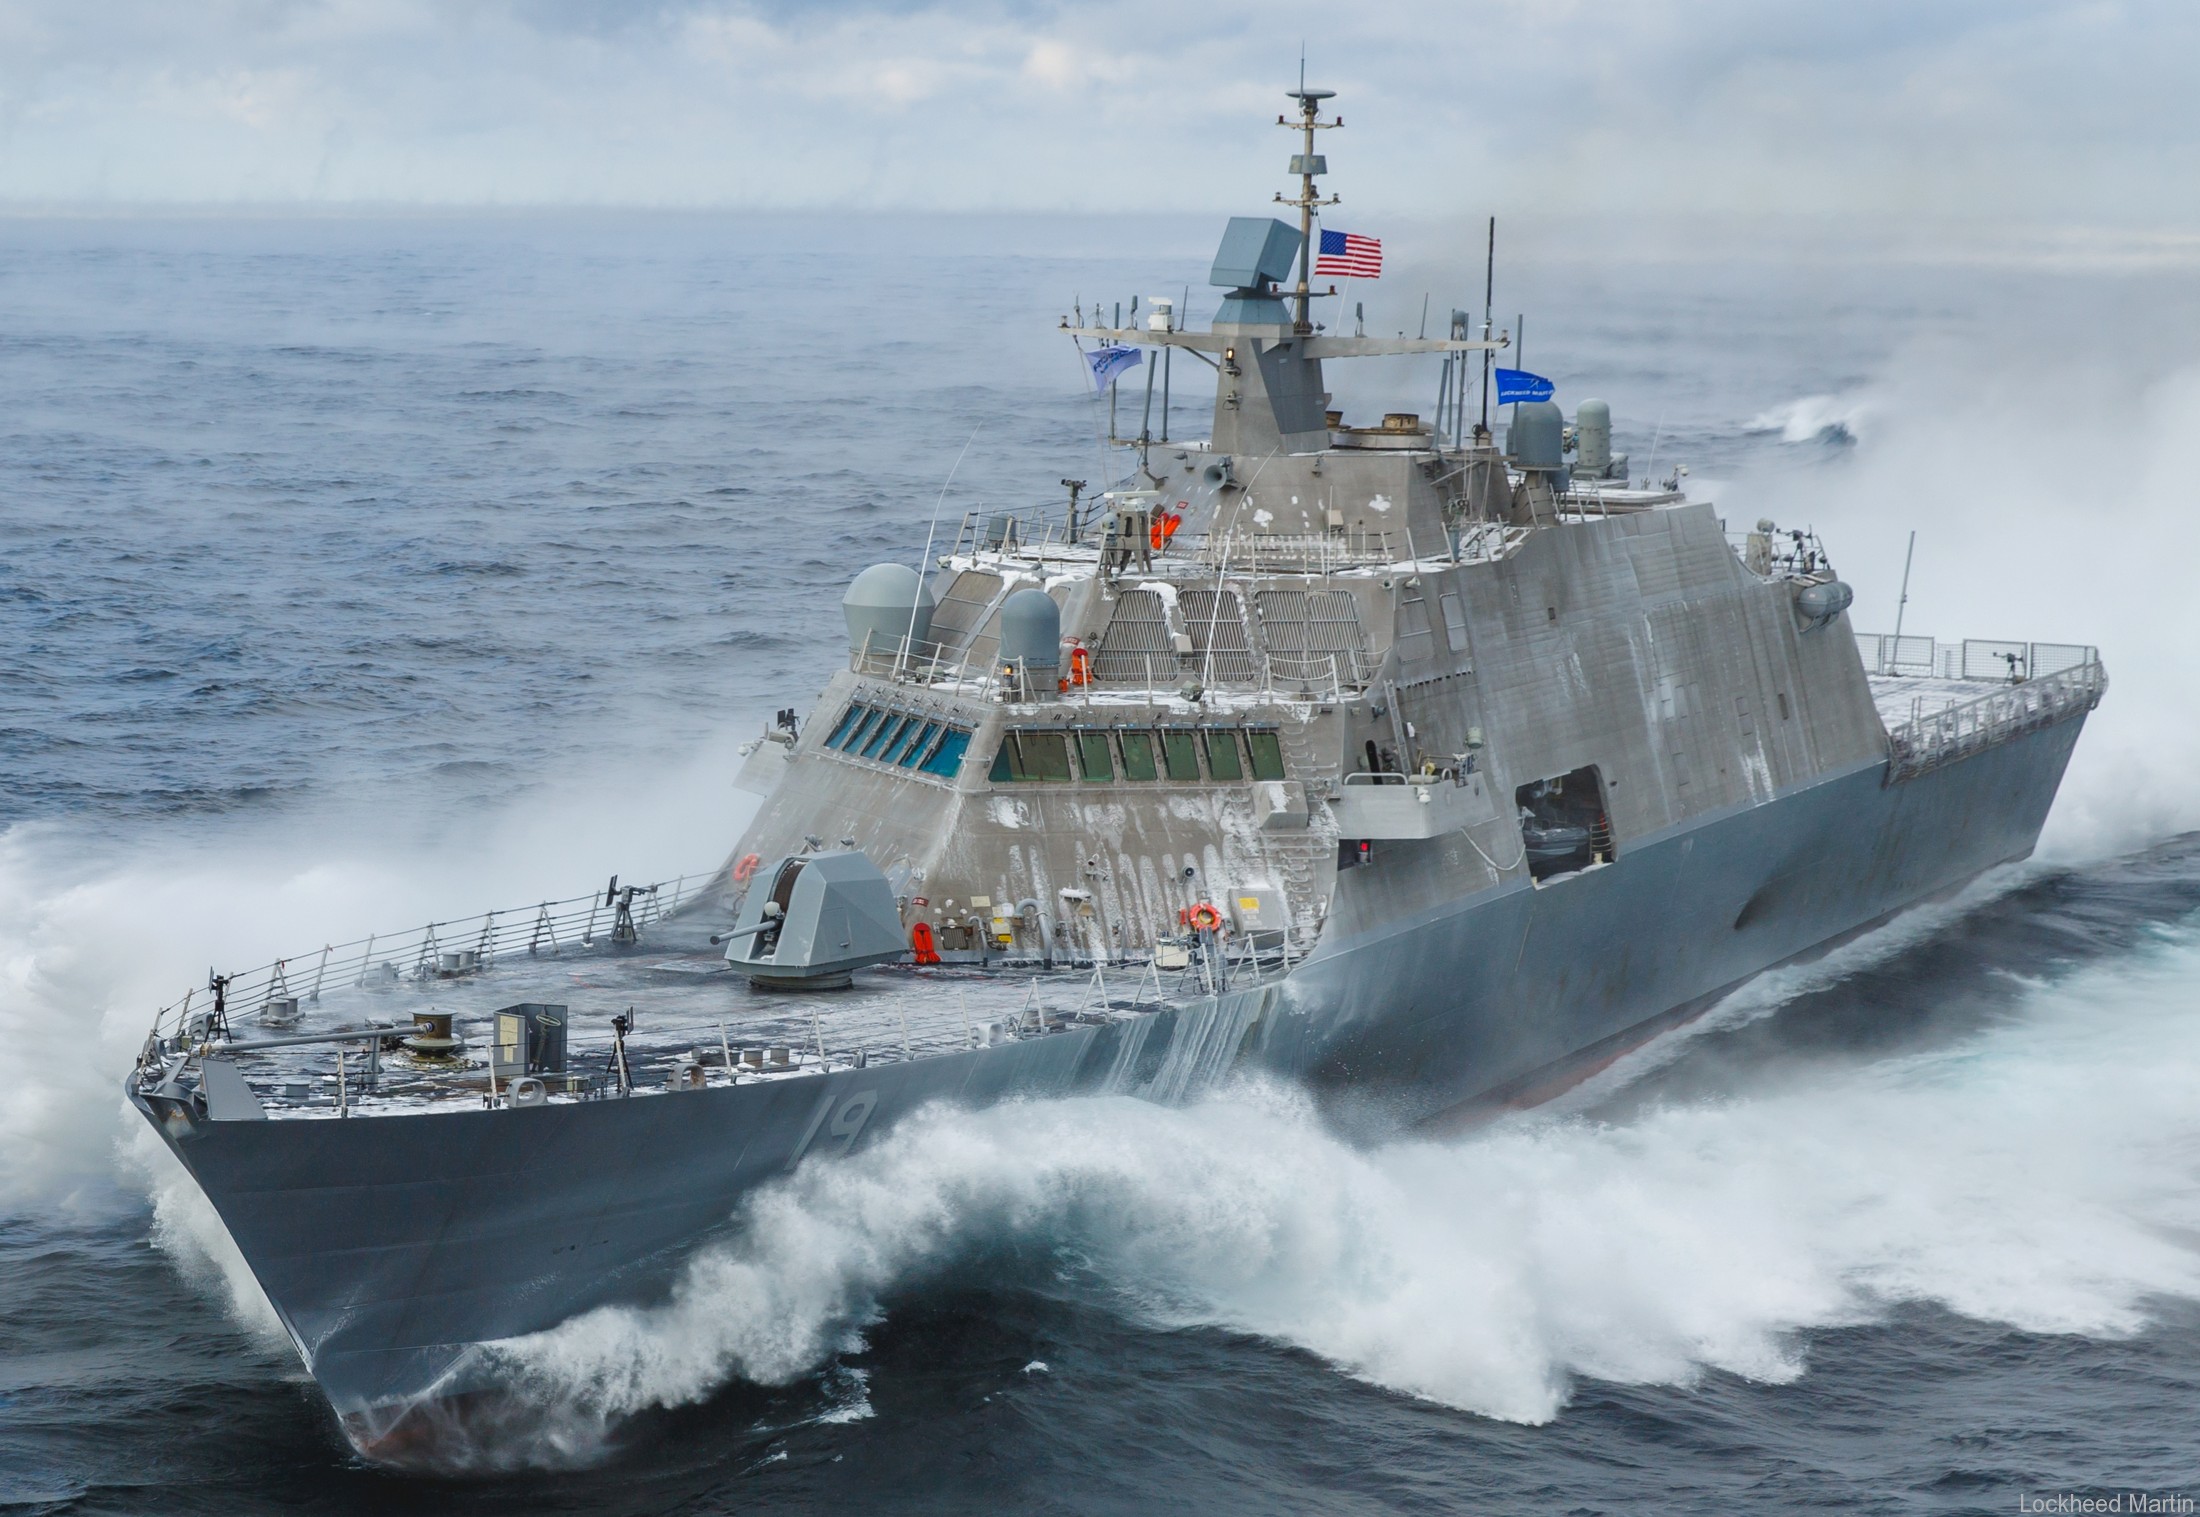 lcs-19 uss st. louis freedom class littoral combat ship us navy 10 acceptance trials